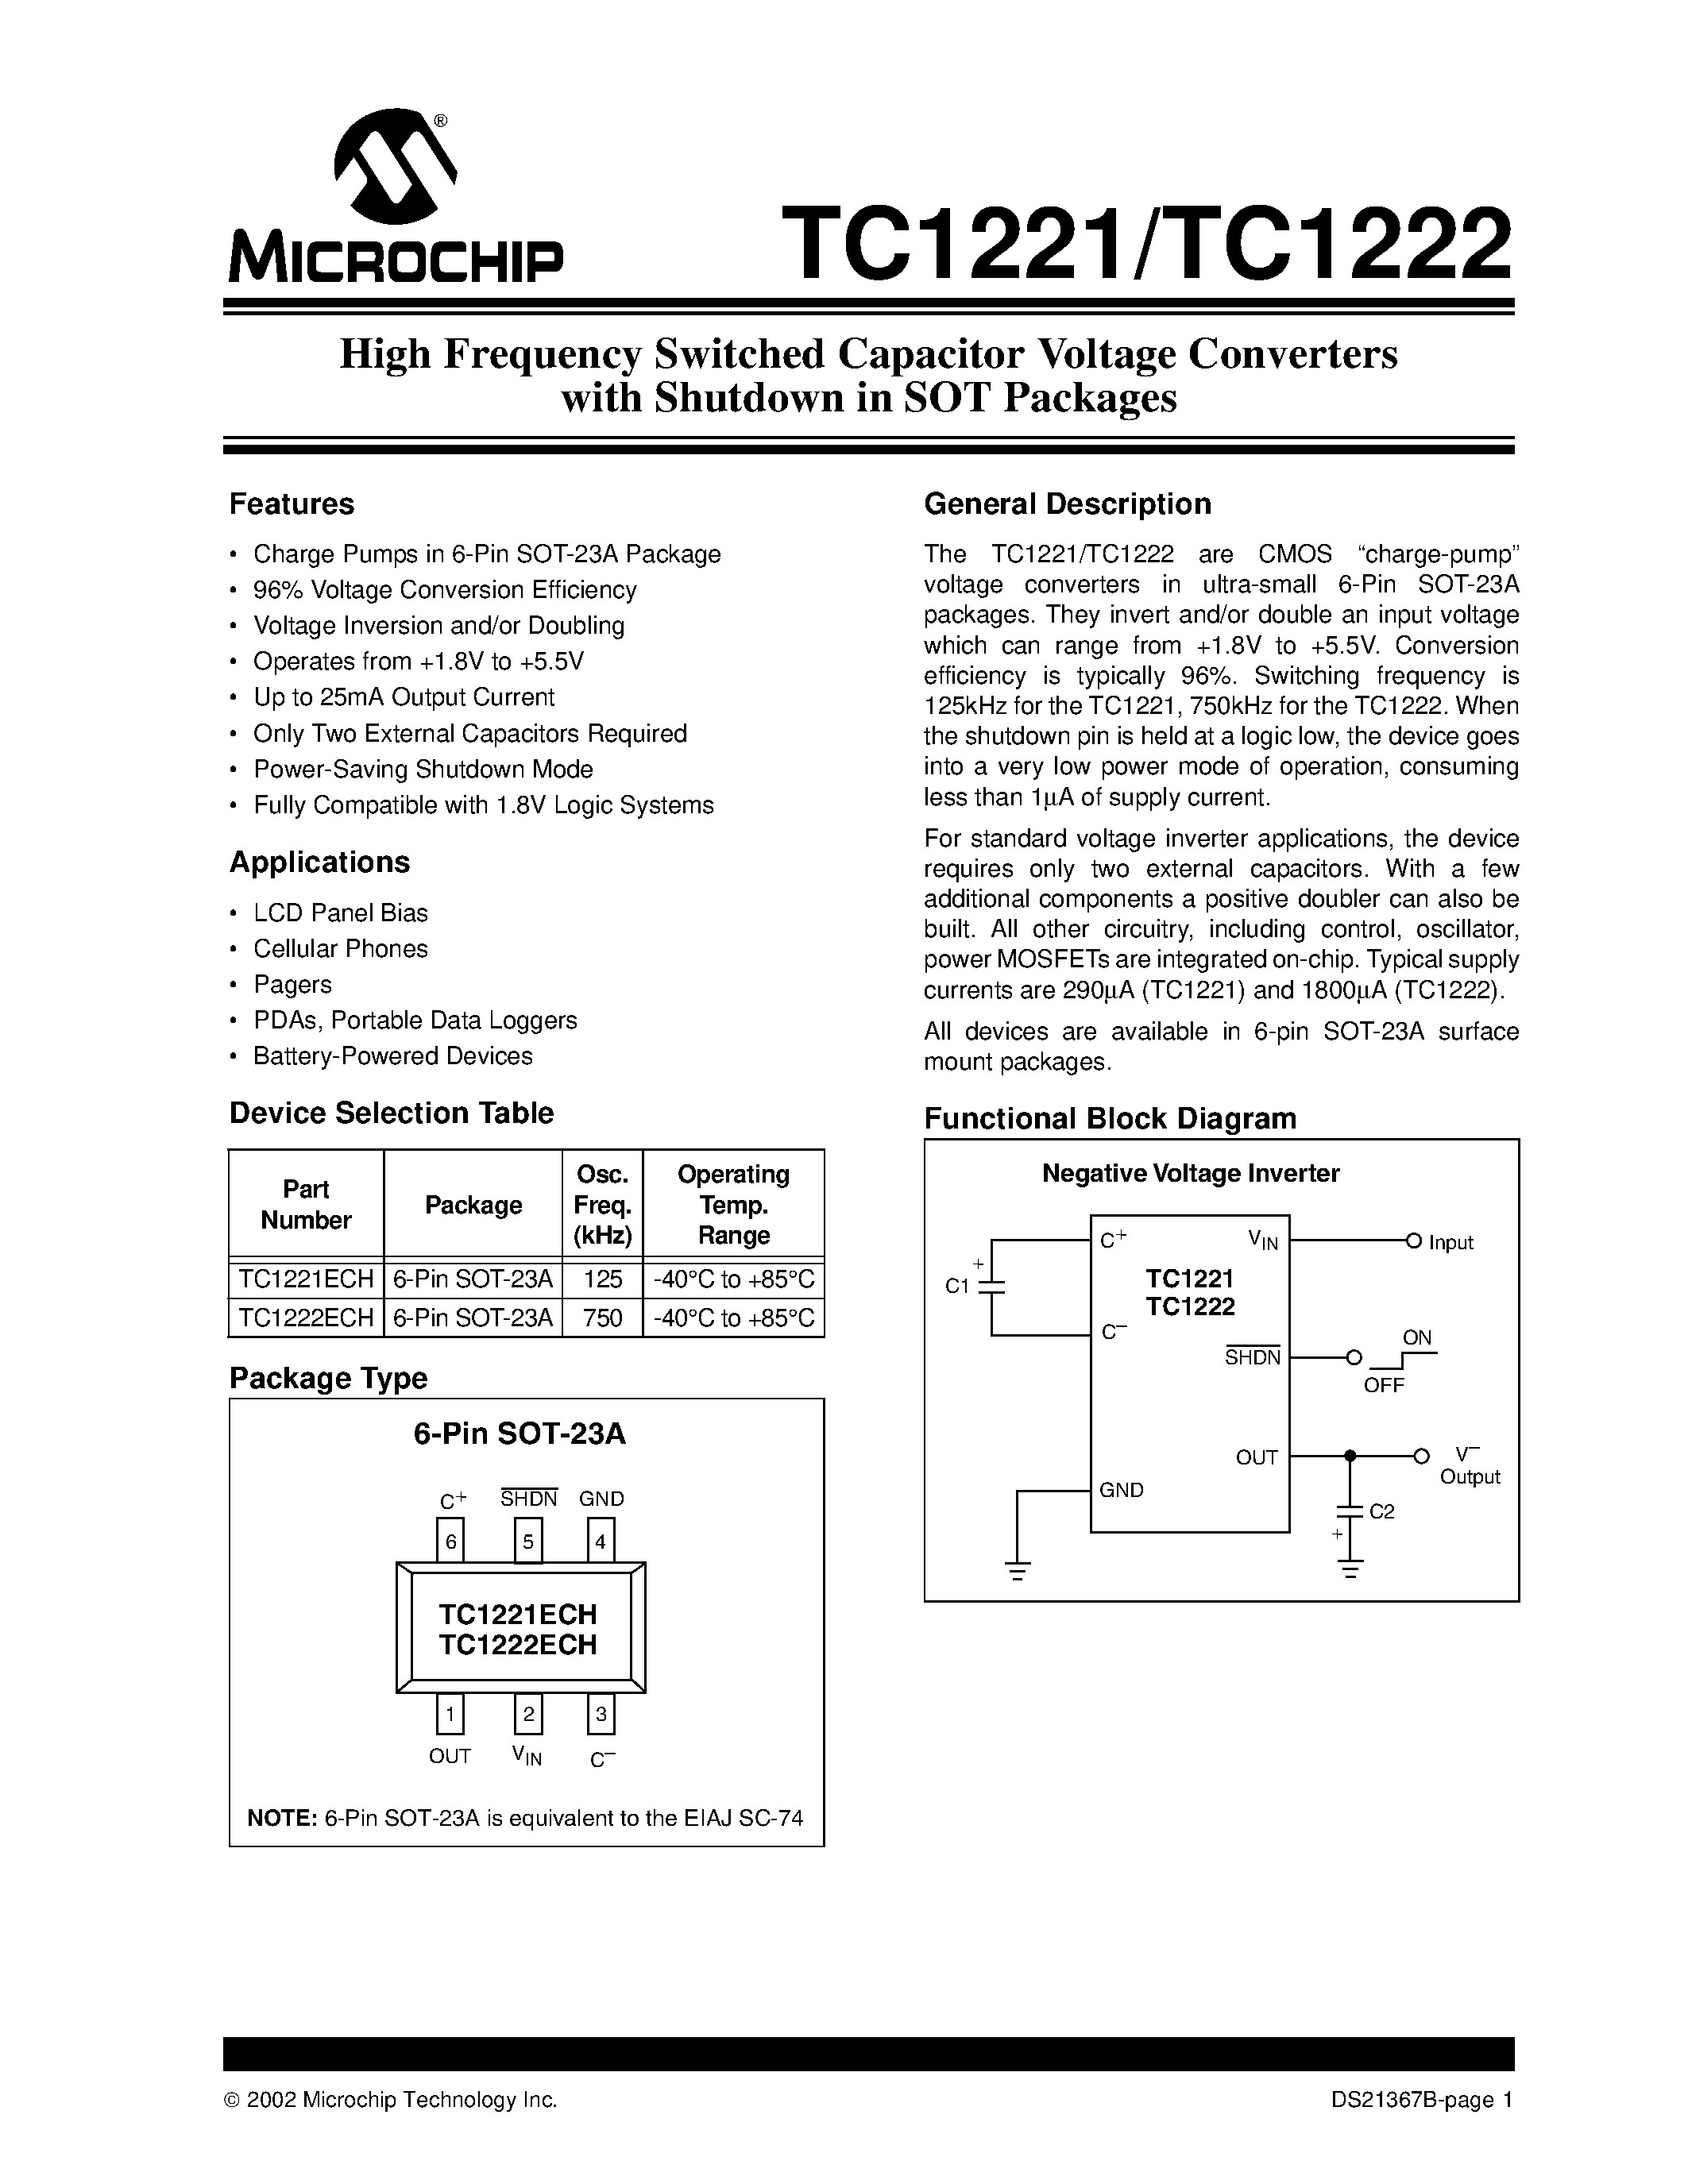 Datasheet TC1221 - (TC1221) High Frequency Switched Capacitor Voltage Converters with Shutdown in SOT Packages page 1